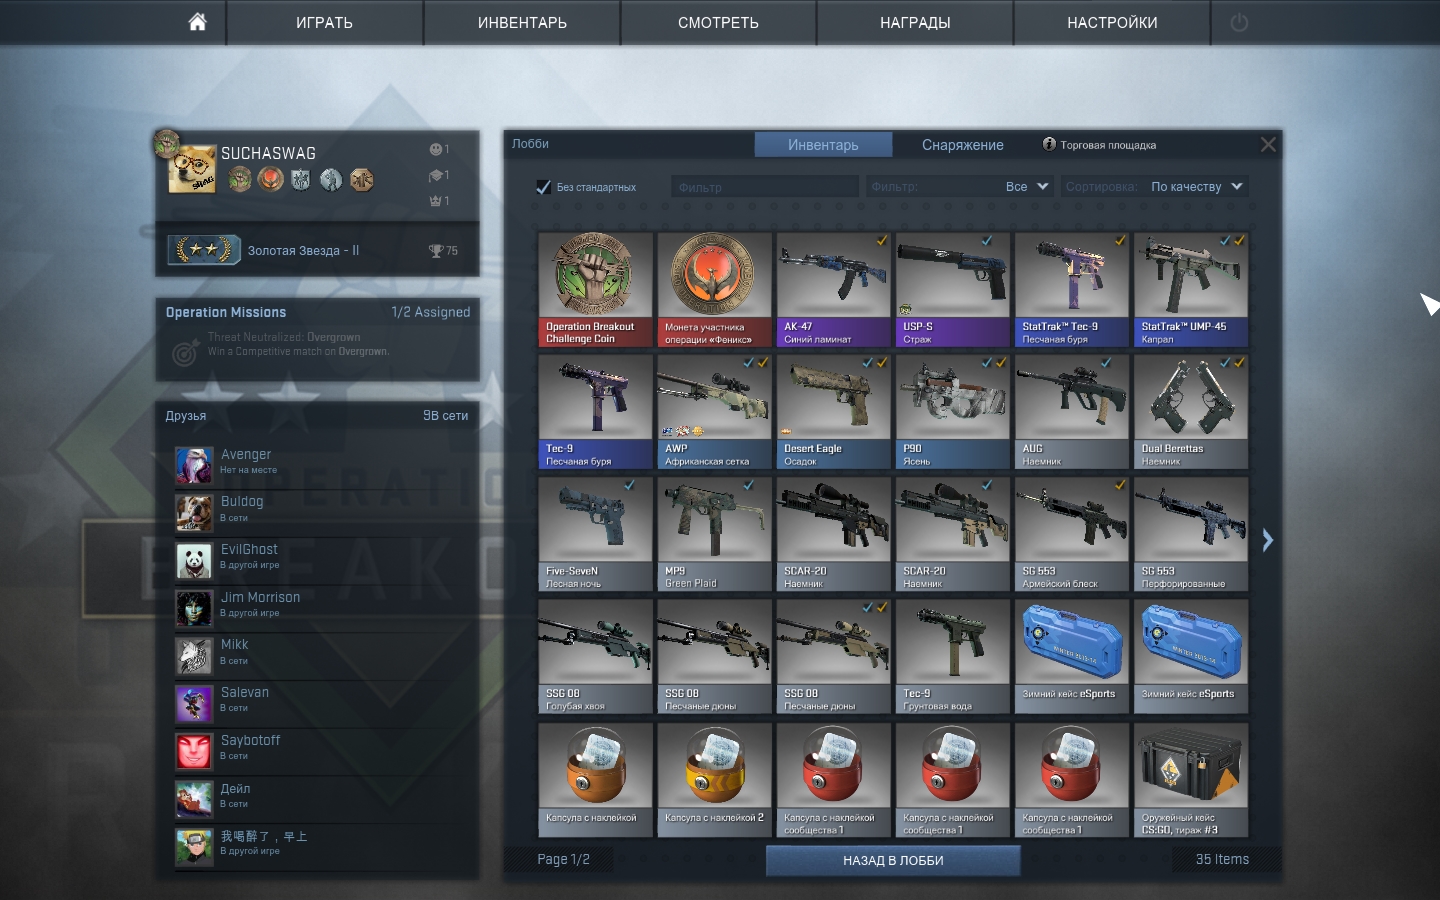 Cs go betting sites for small inventories and cost nero diciassette betting